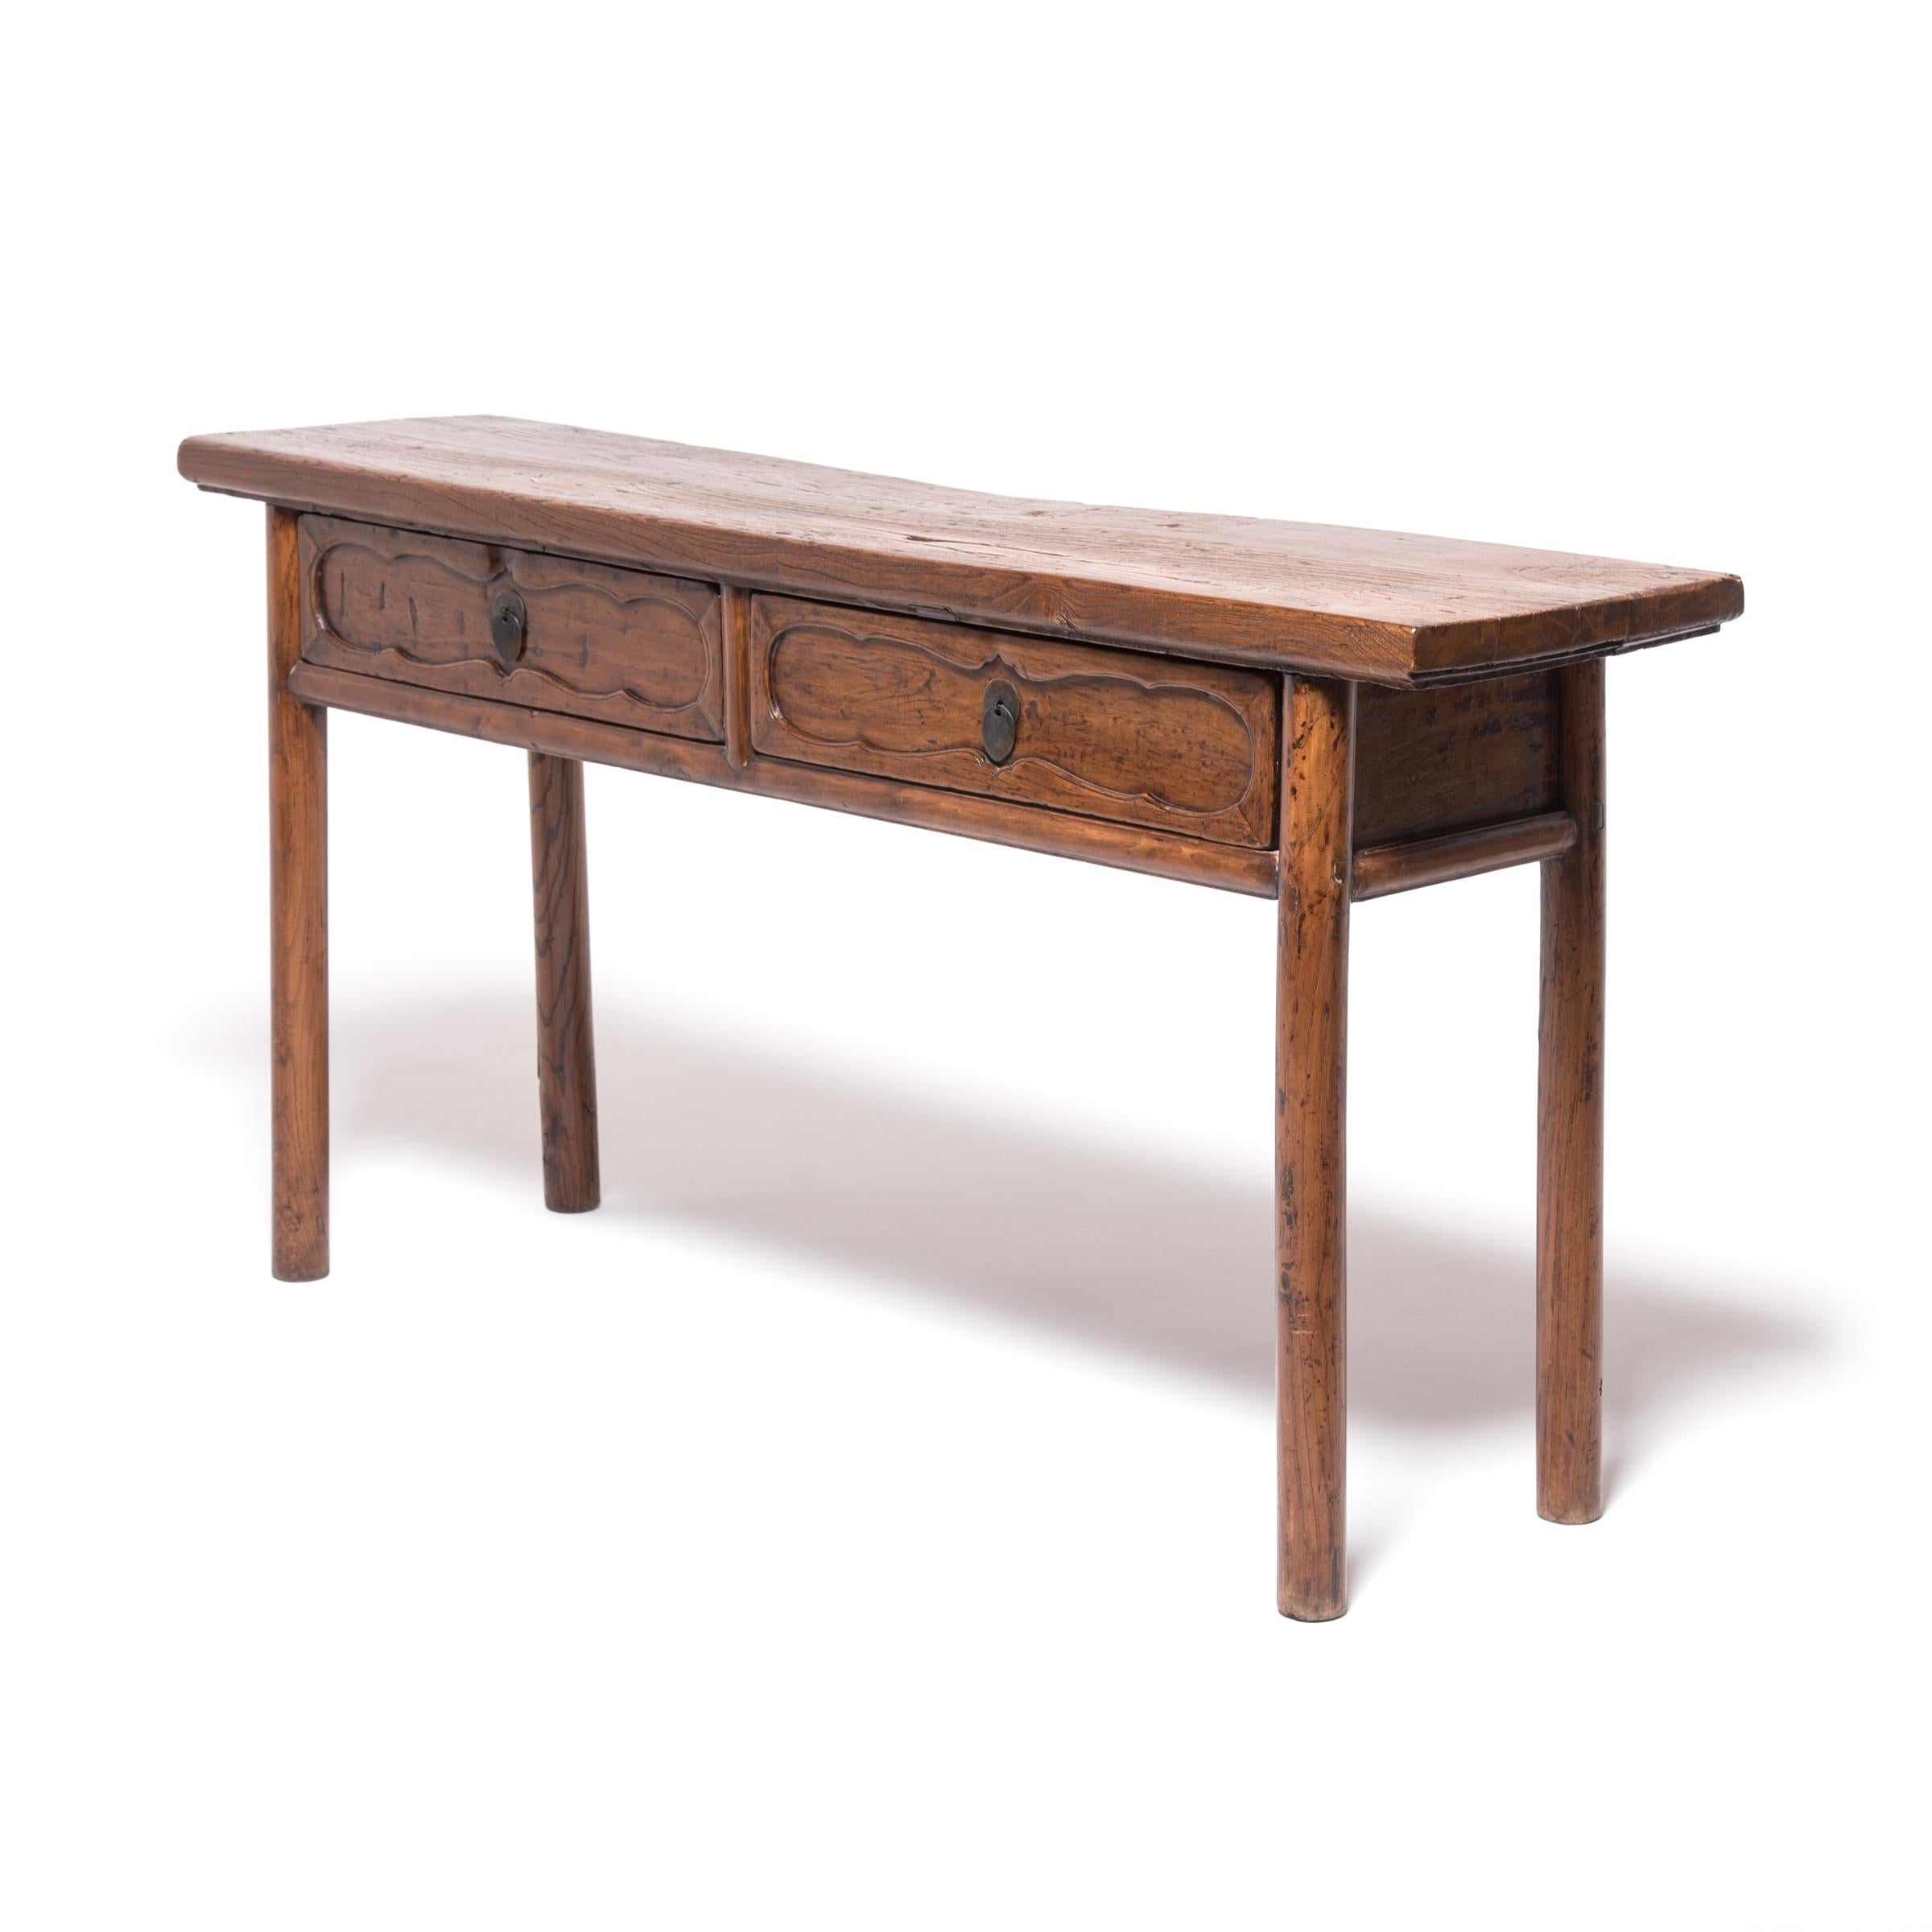 The warm patina of timeworn wood and straightforward styling earn this altar table a place in any room. Made in Northern China in the mid-19th century, the table was once used to hold offerings as part of ancestor worship in the home. Showcasing the